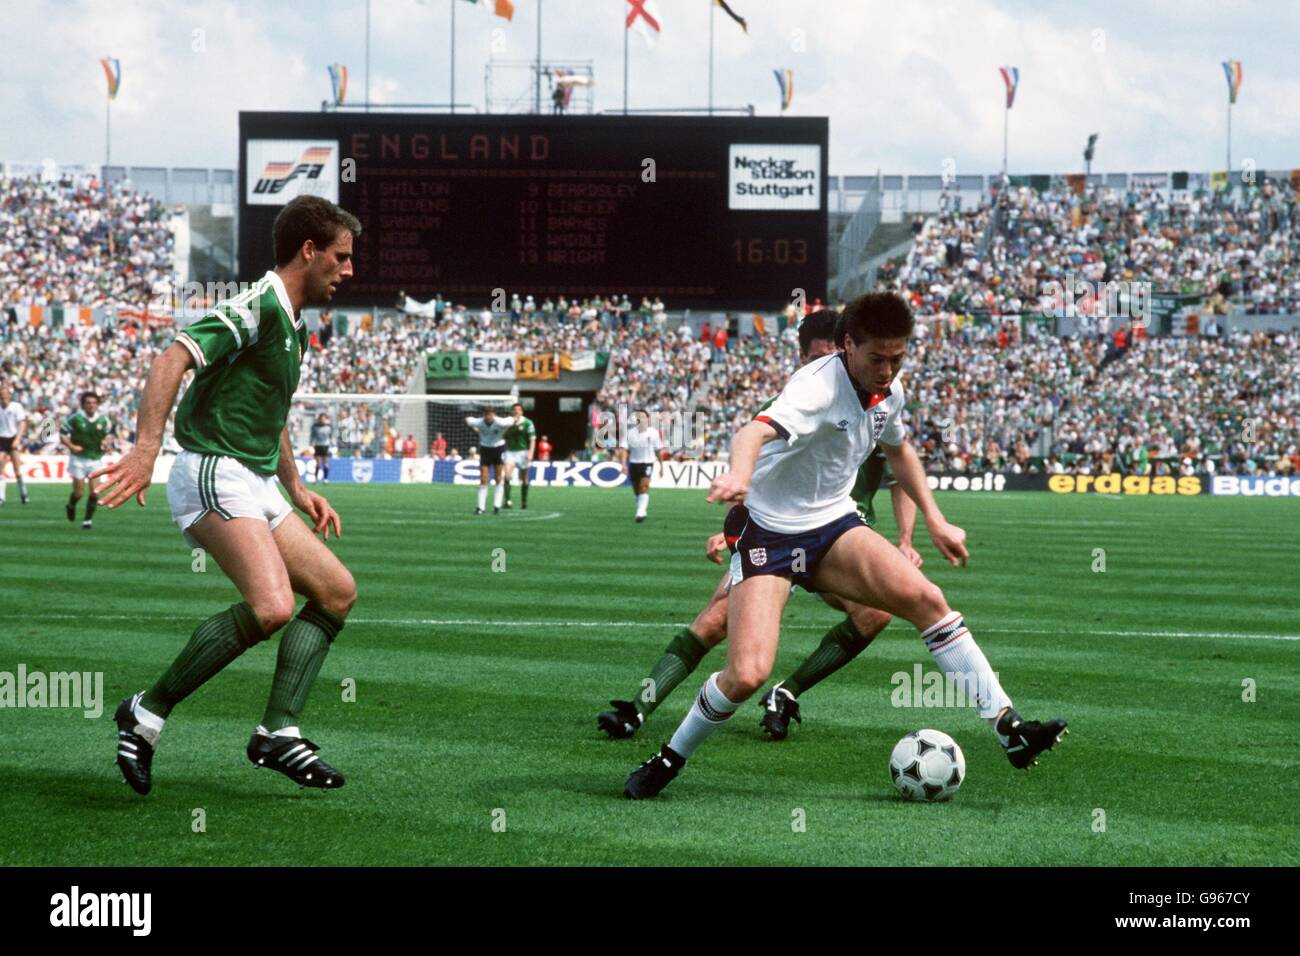 Soccer - European Championships - Euro 88 West Germany - Group Two - Ireland v England - Neckarstadion. England Chris Waddle (right) shields the ball as Ireland's Mick McCarthy (left) moves in to tackle Stock Photo